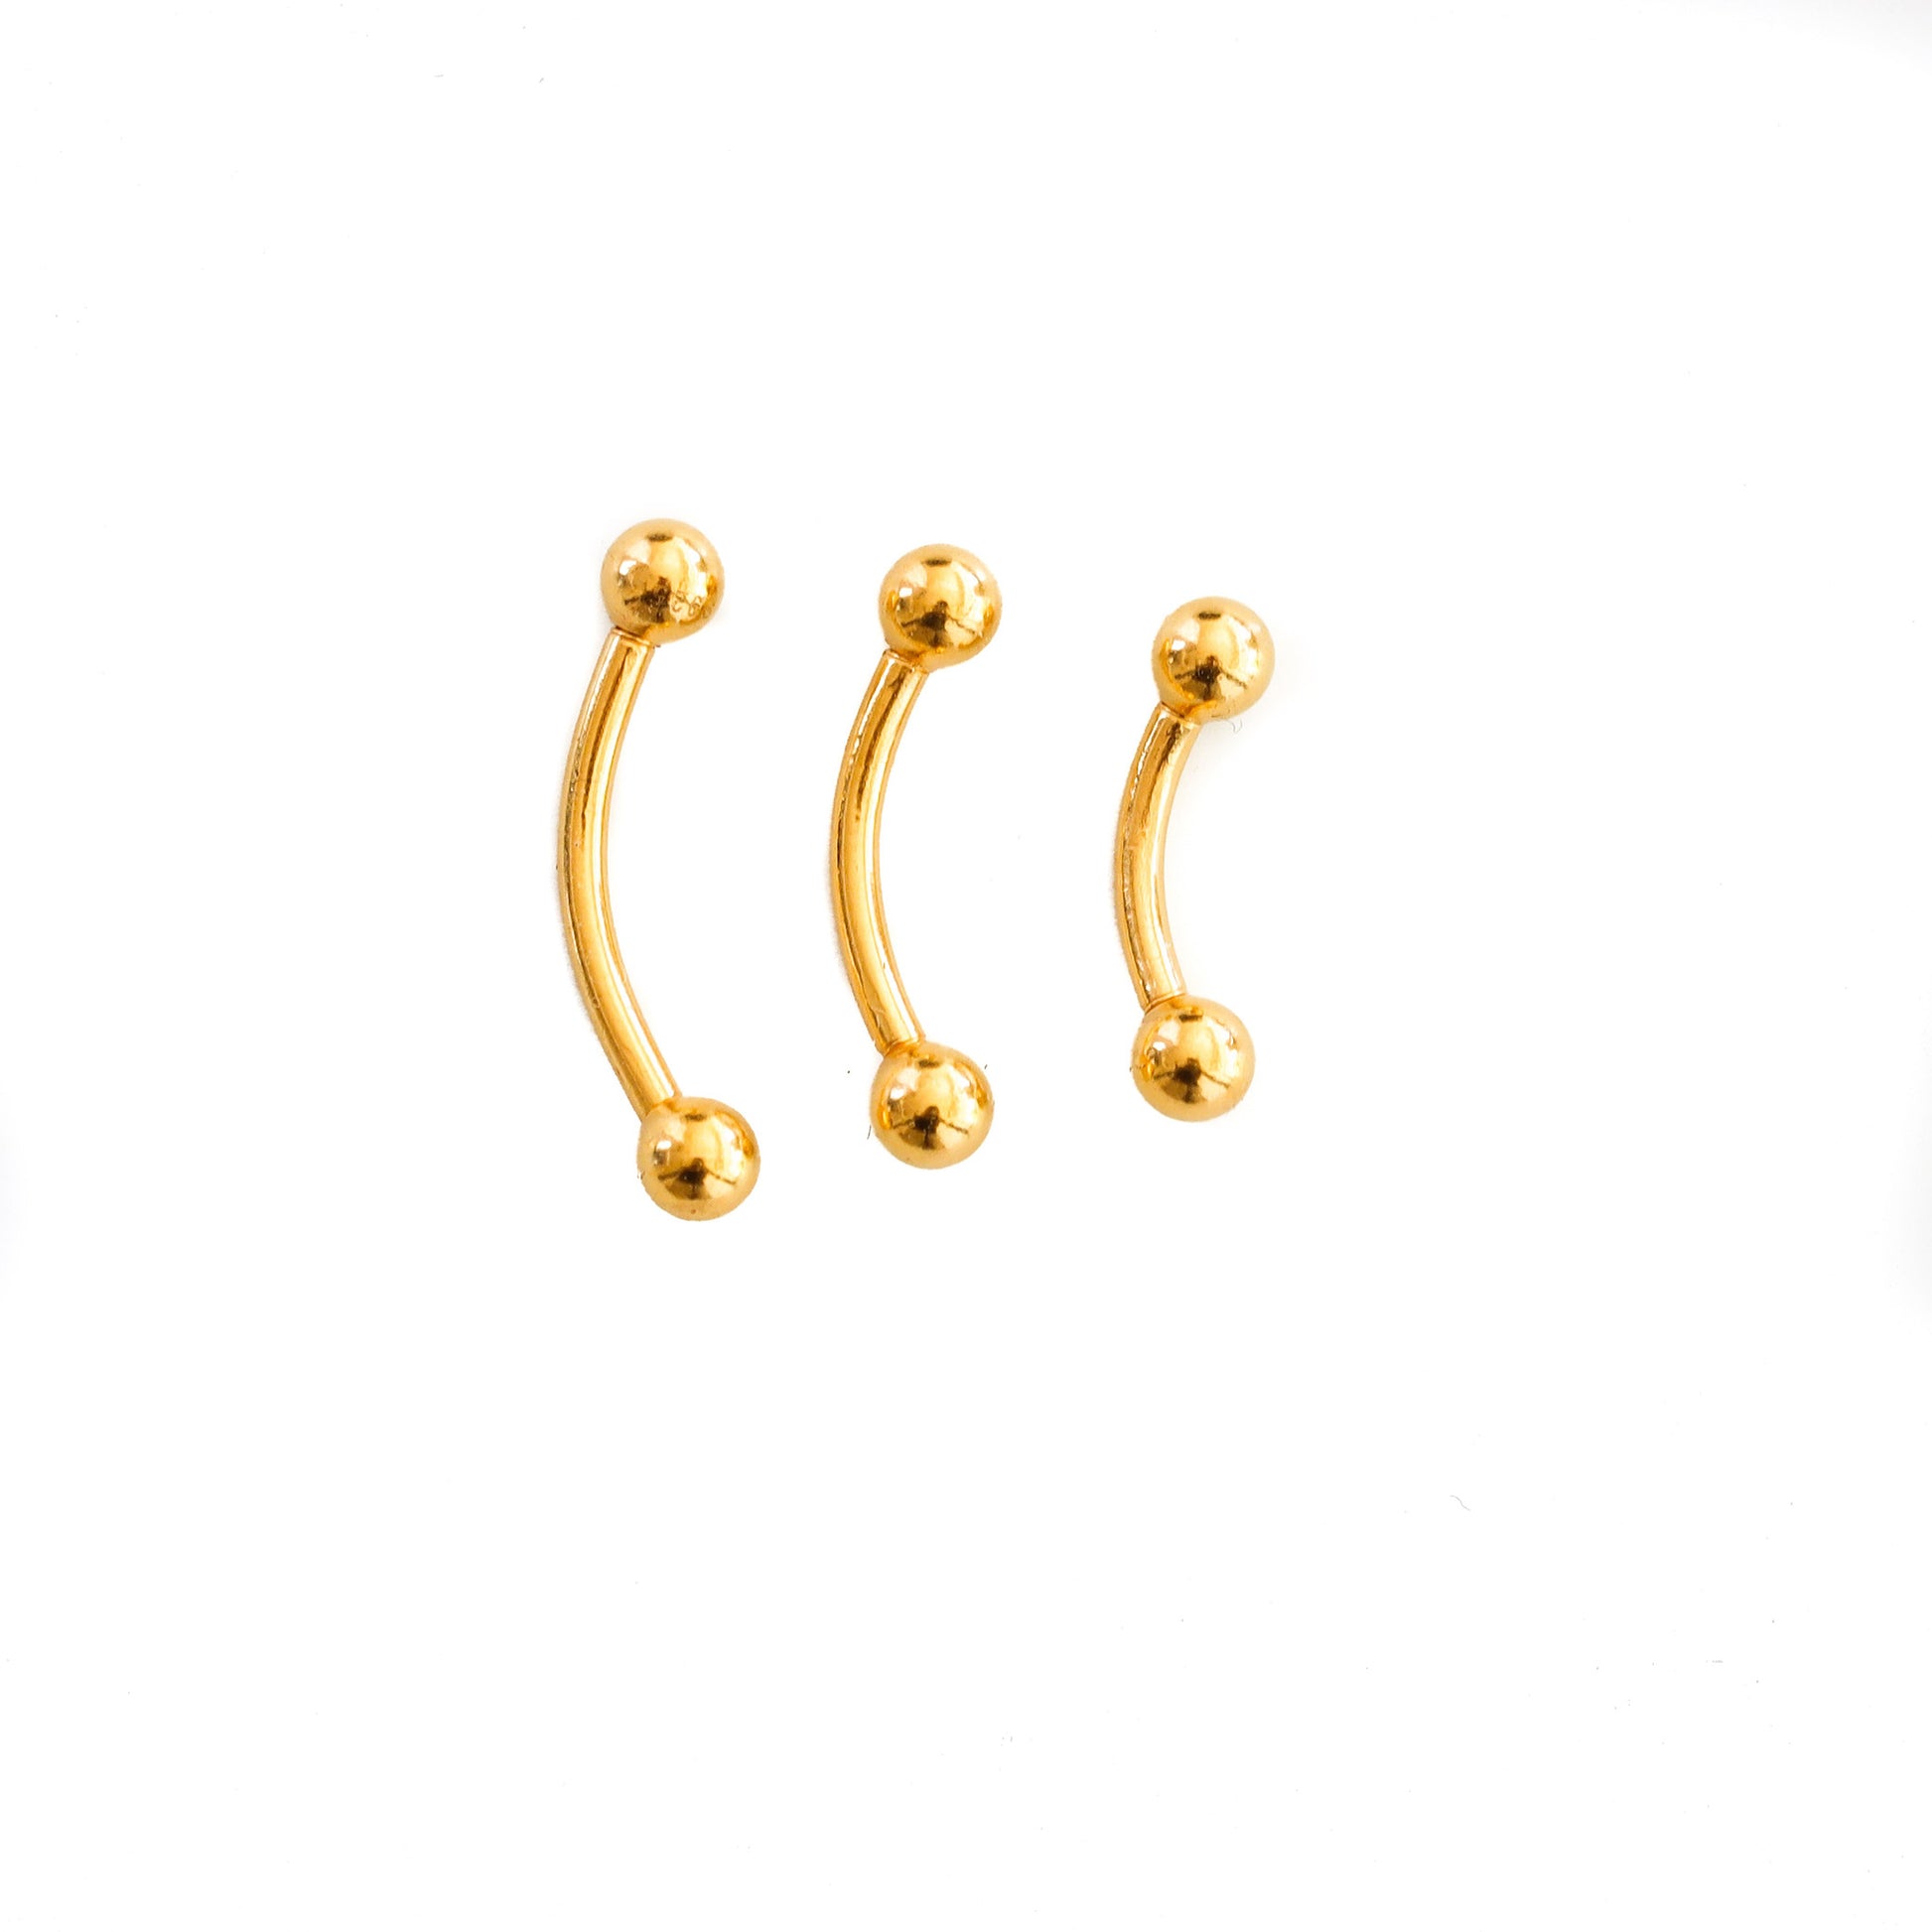 Vermeil | 24k Gold Coated 925 Silver 16G Small Curved Barbell with 3mm Balls | 6mm 1/4" 8mm 5/16" 10mm 3/8" | Eyebrow Septum Daith Rook - Sturdy South